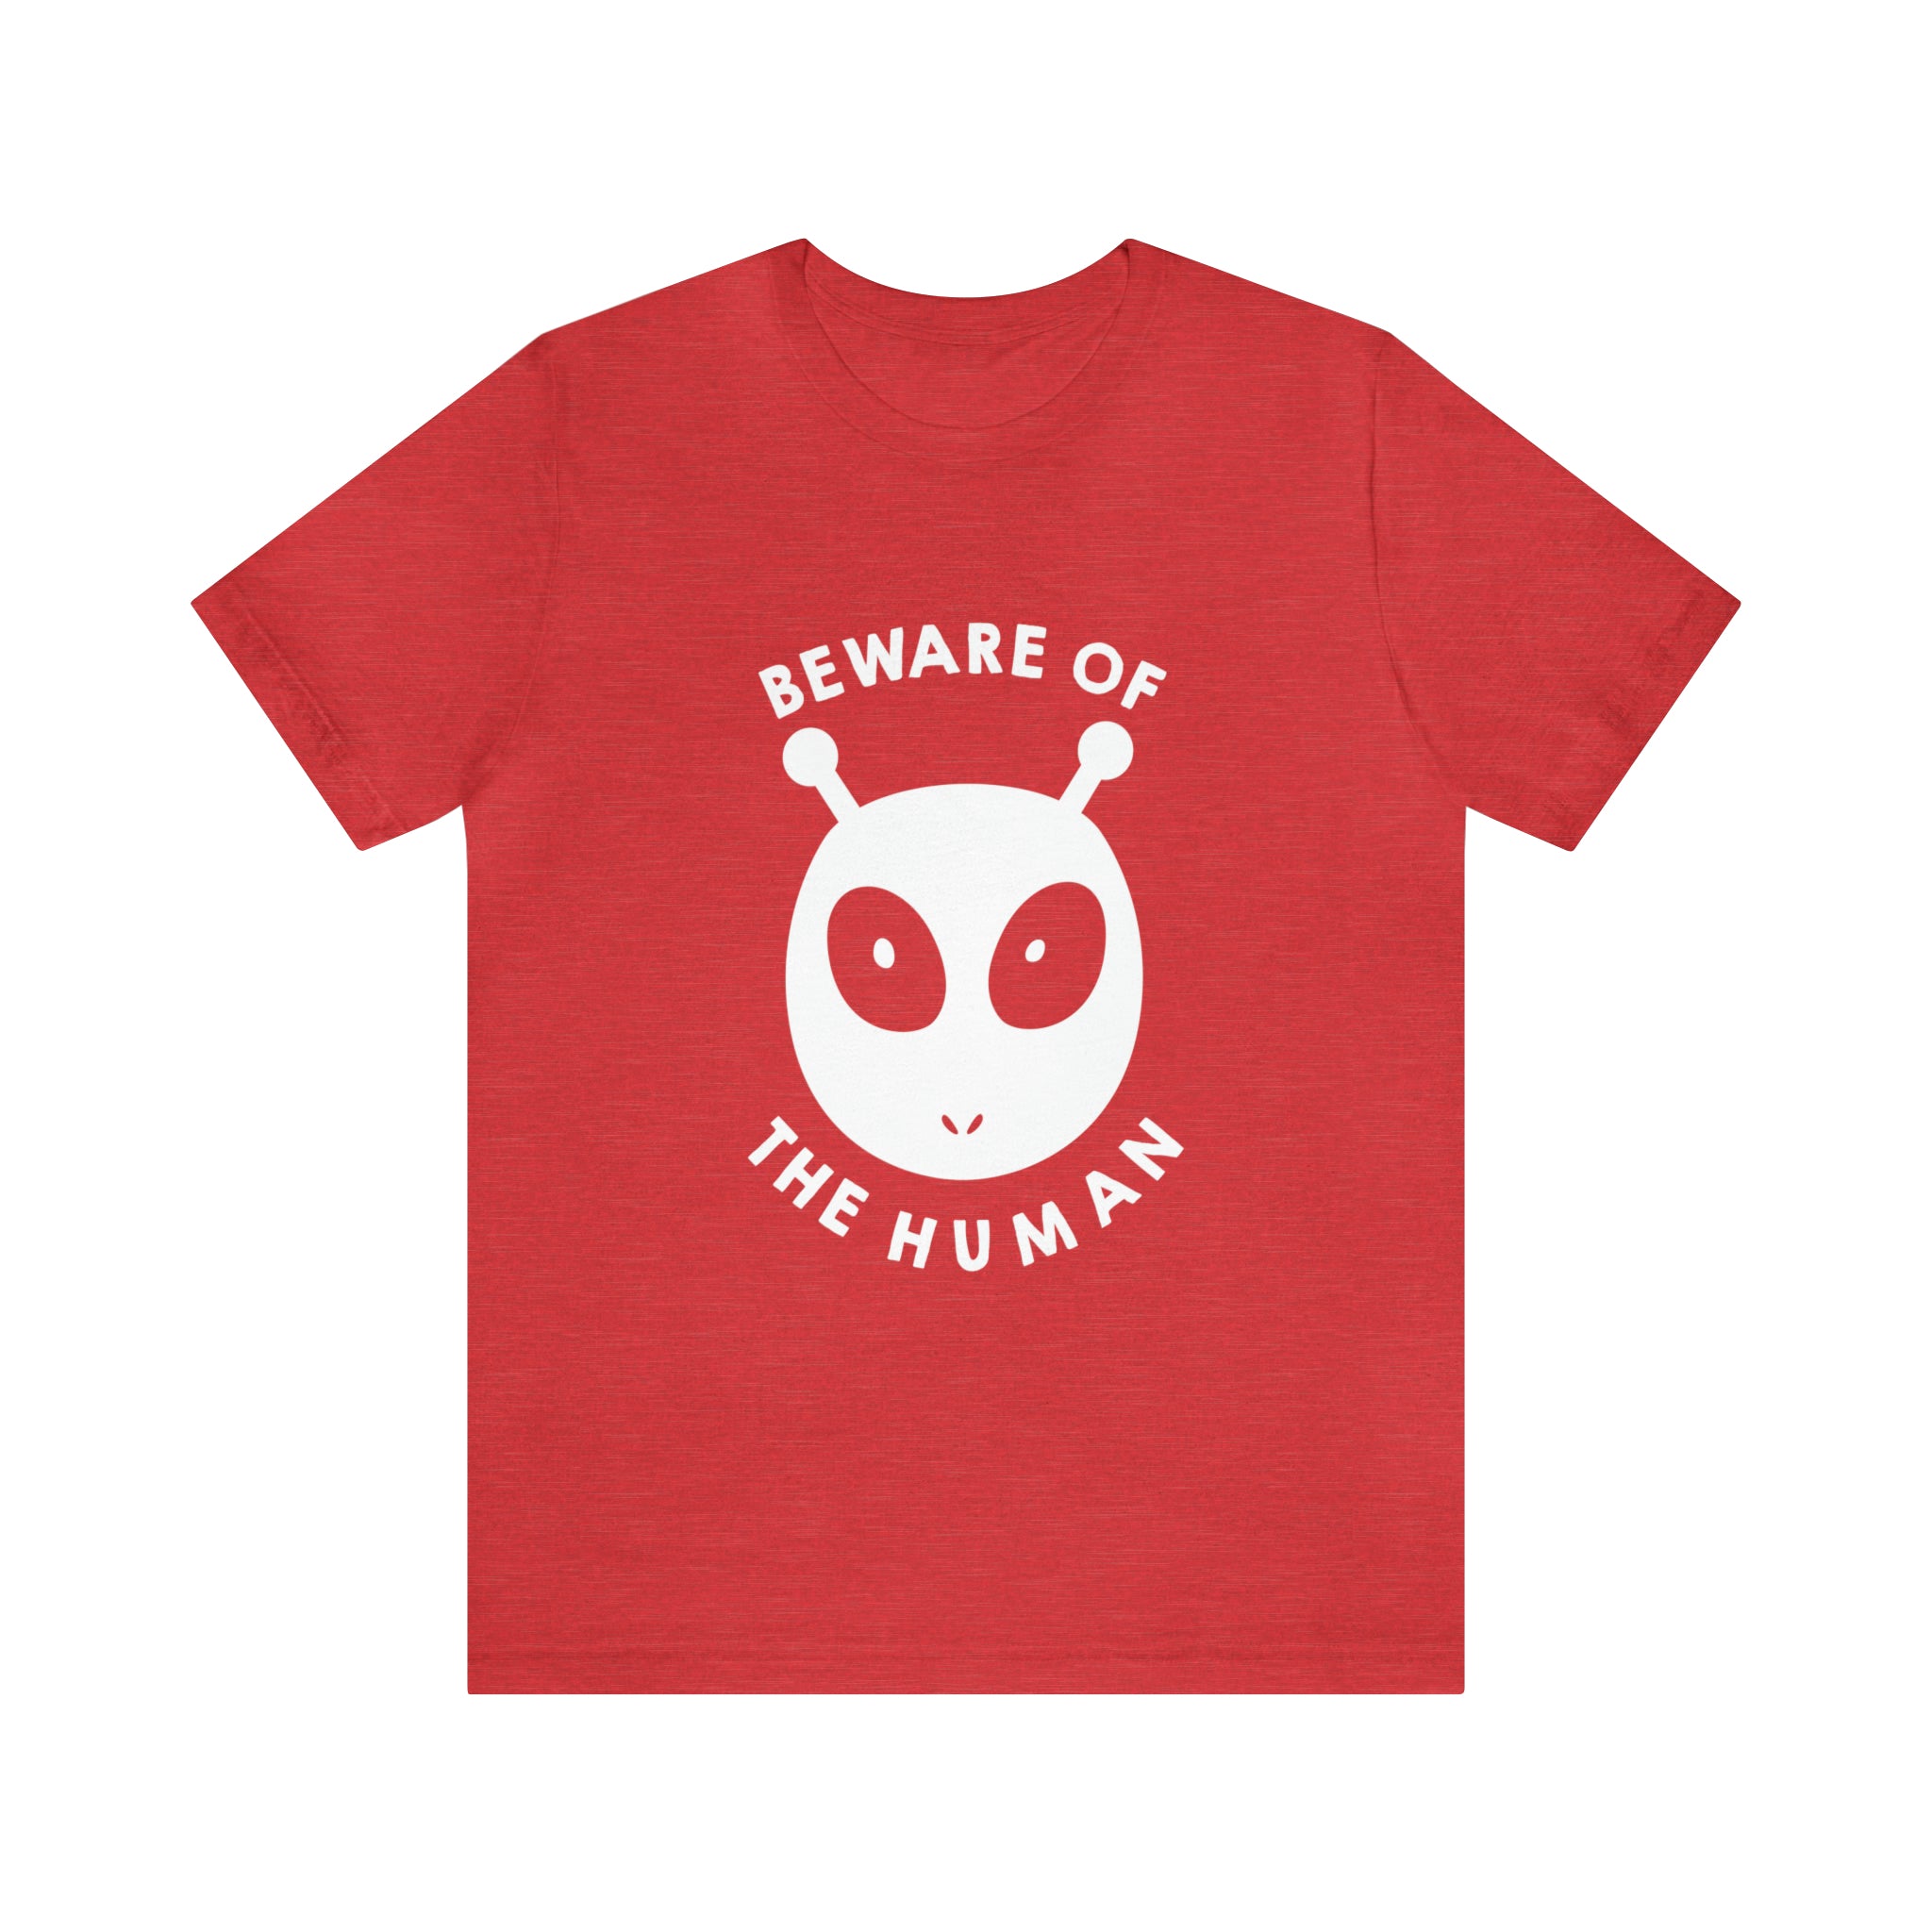 A Printify "Beware of the humans" T-Shirt